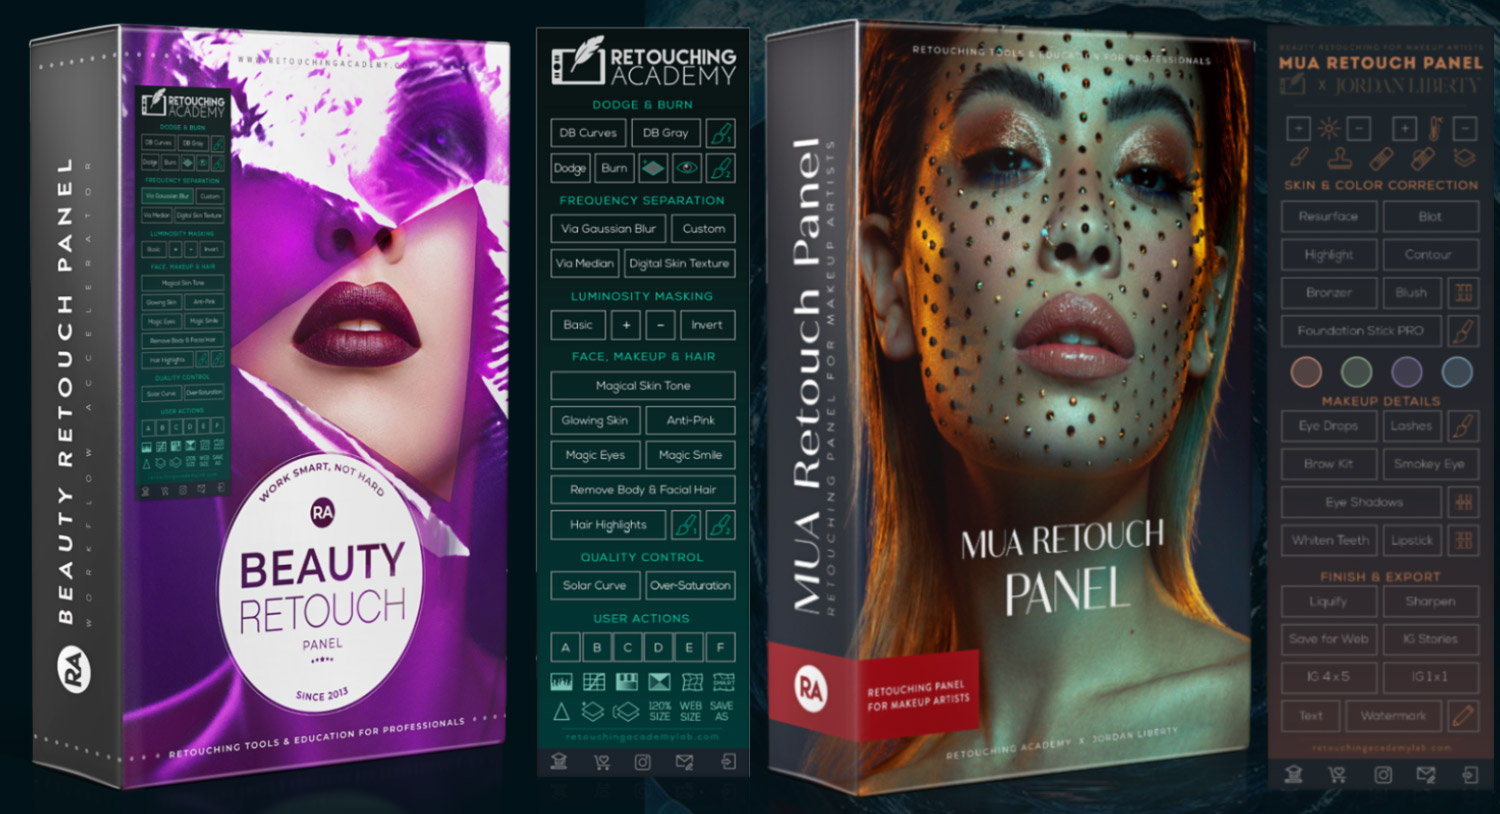 Beauty Retouch V3 3 Panel Update The Retouching Academy Lab